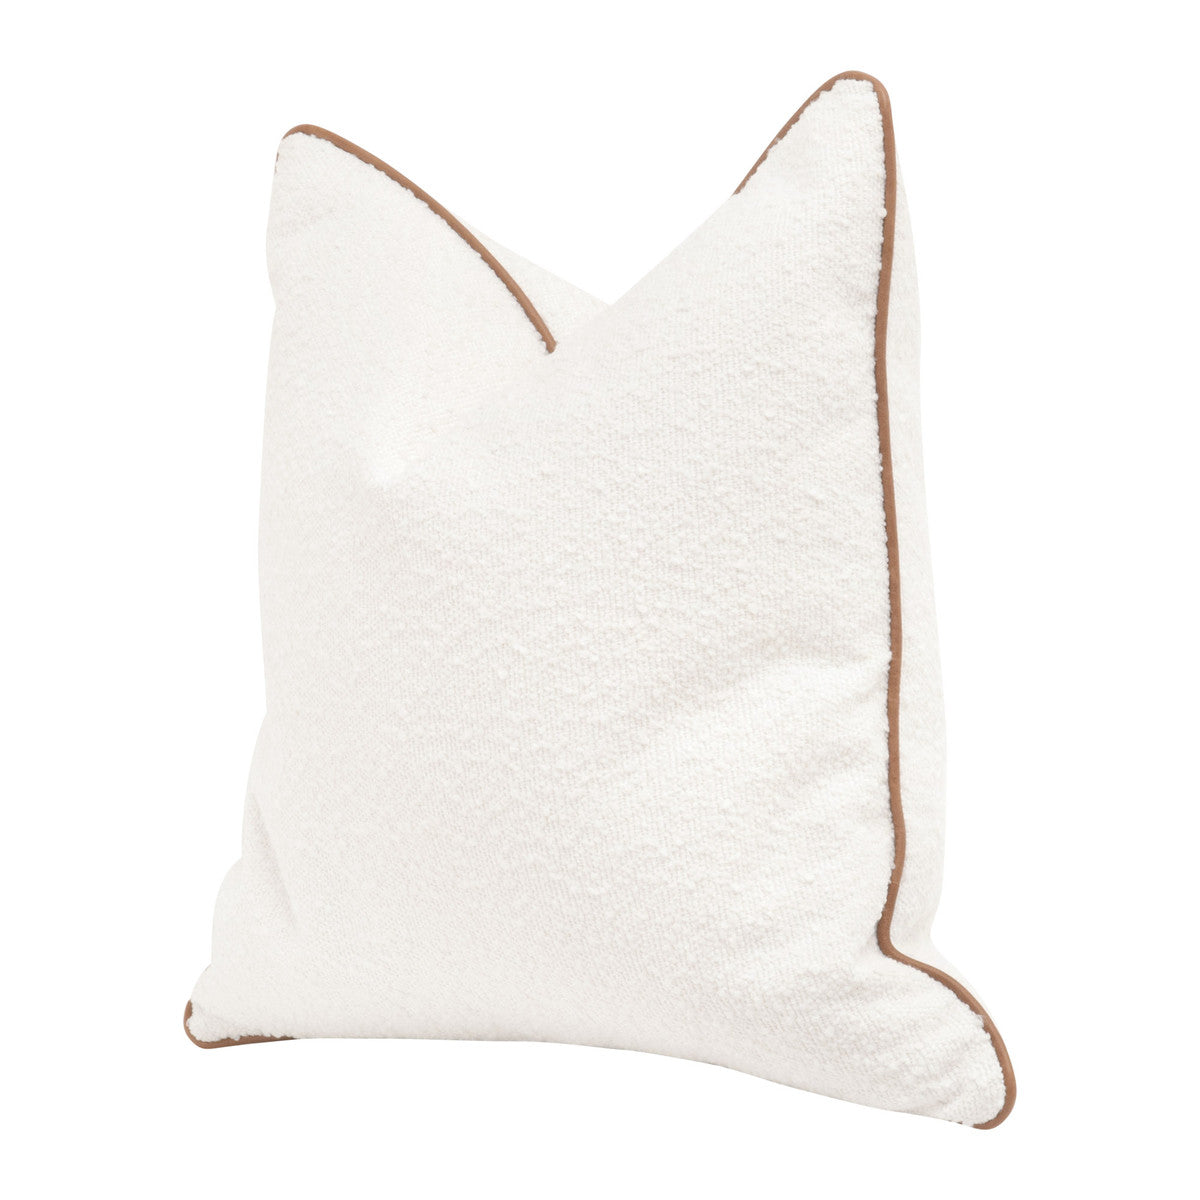 The Not So Basic 22" Essential Pillow - Set of 2